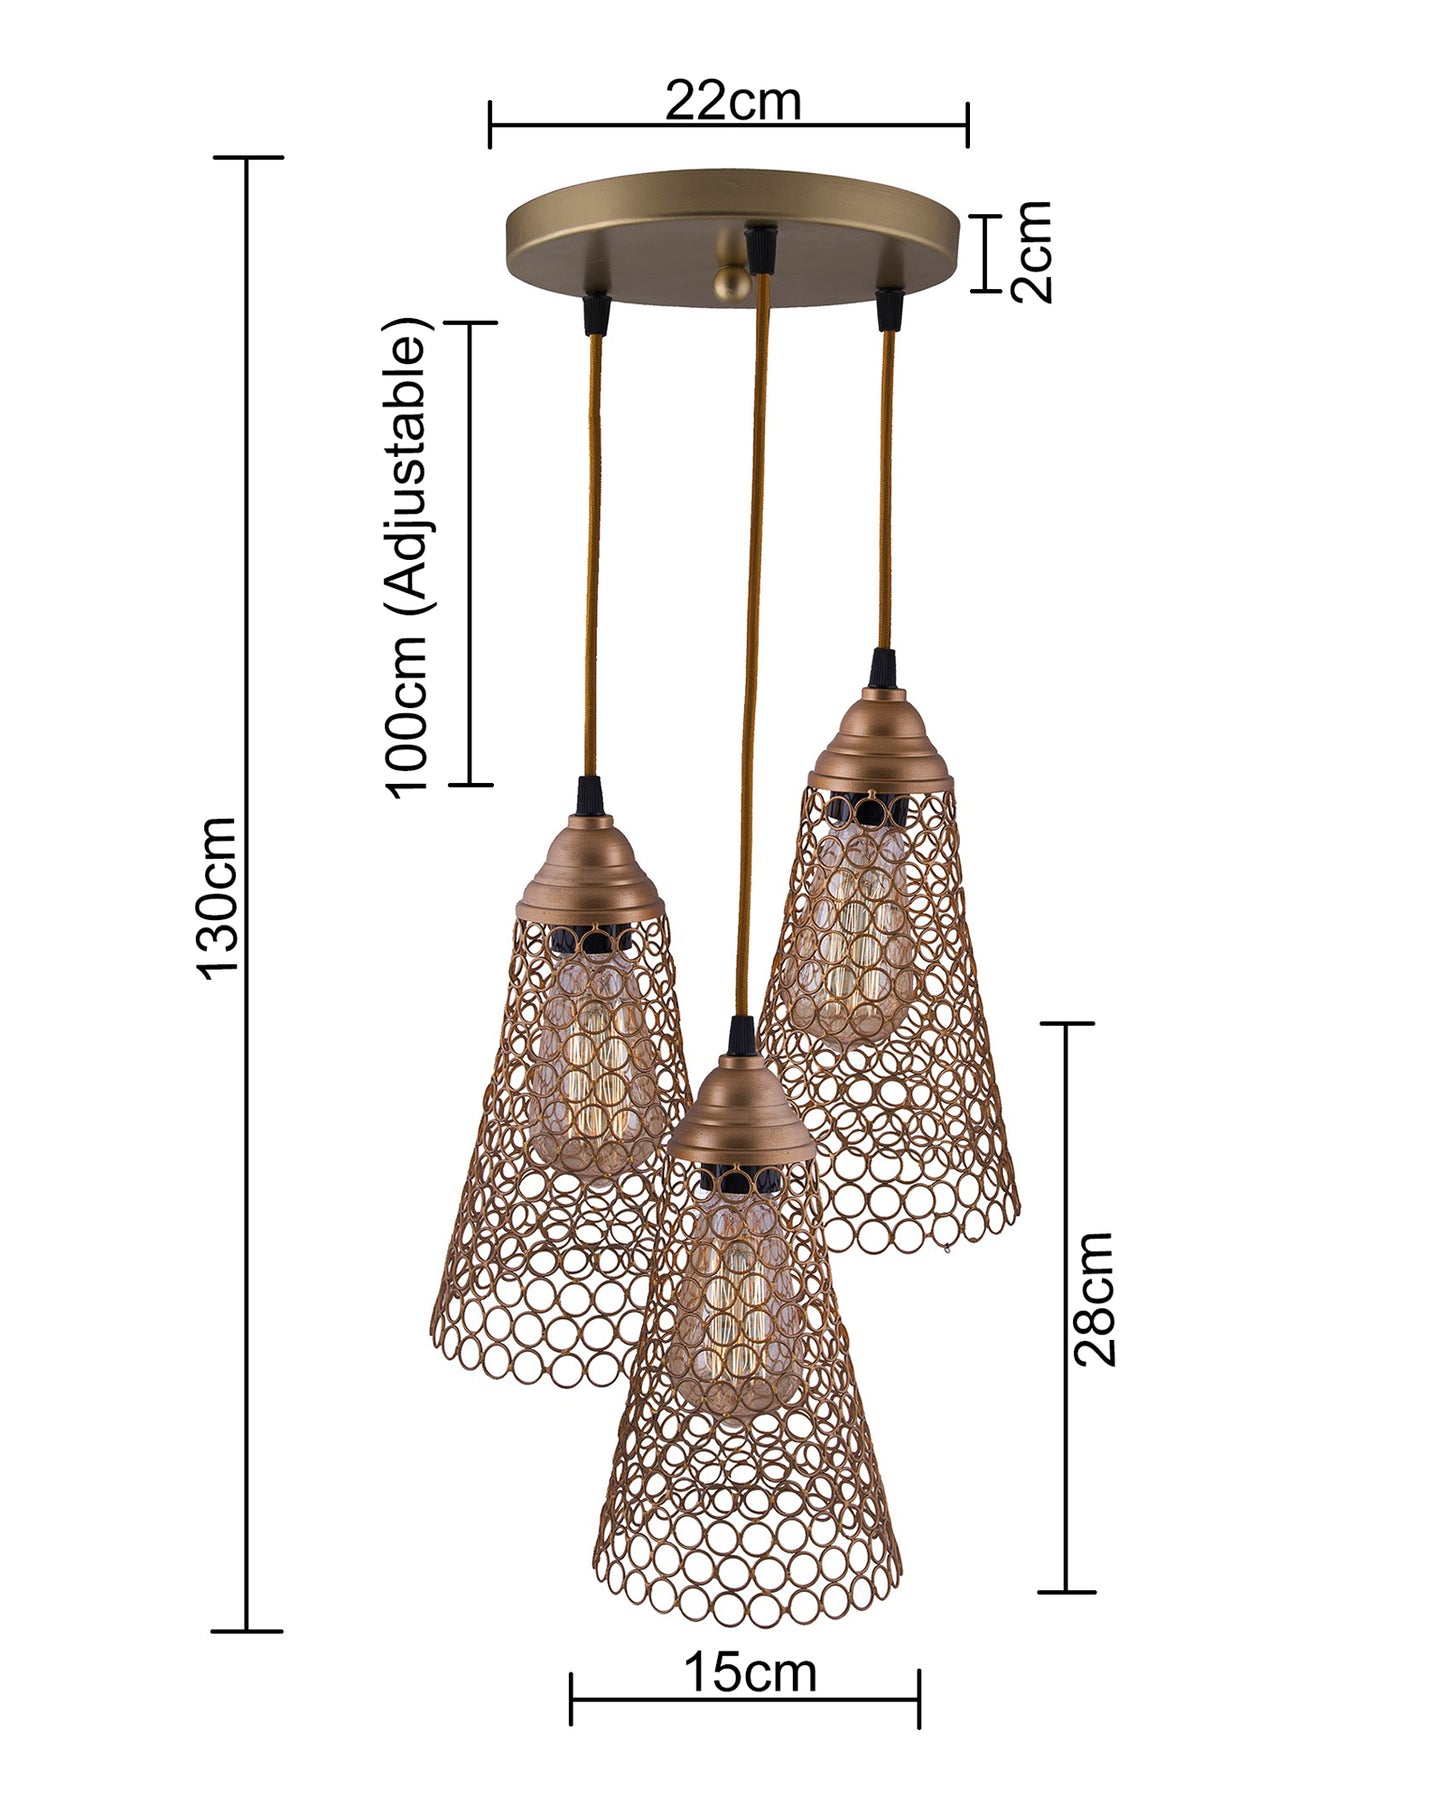 3-lights Round Cluster Chandelier Cone Hanging Pendant Light with Braided Cord